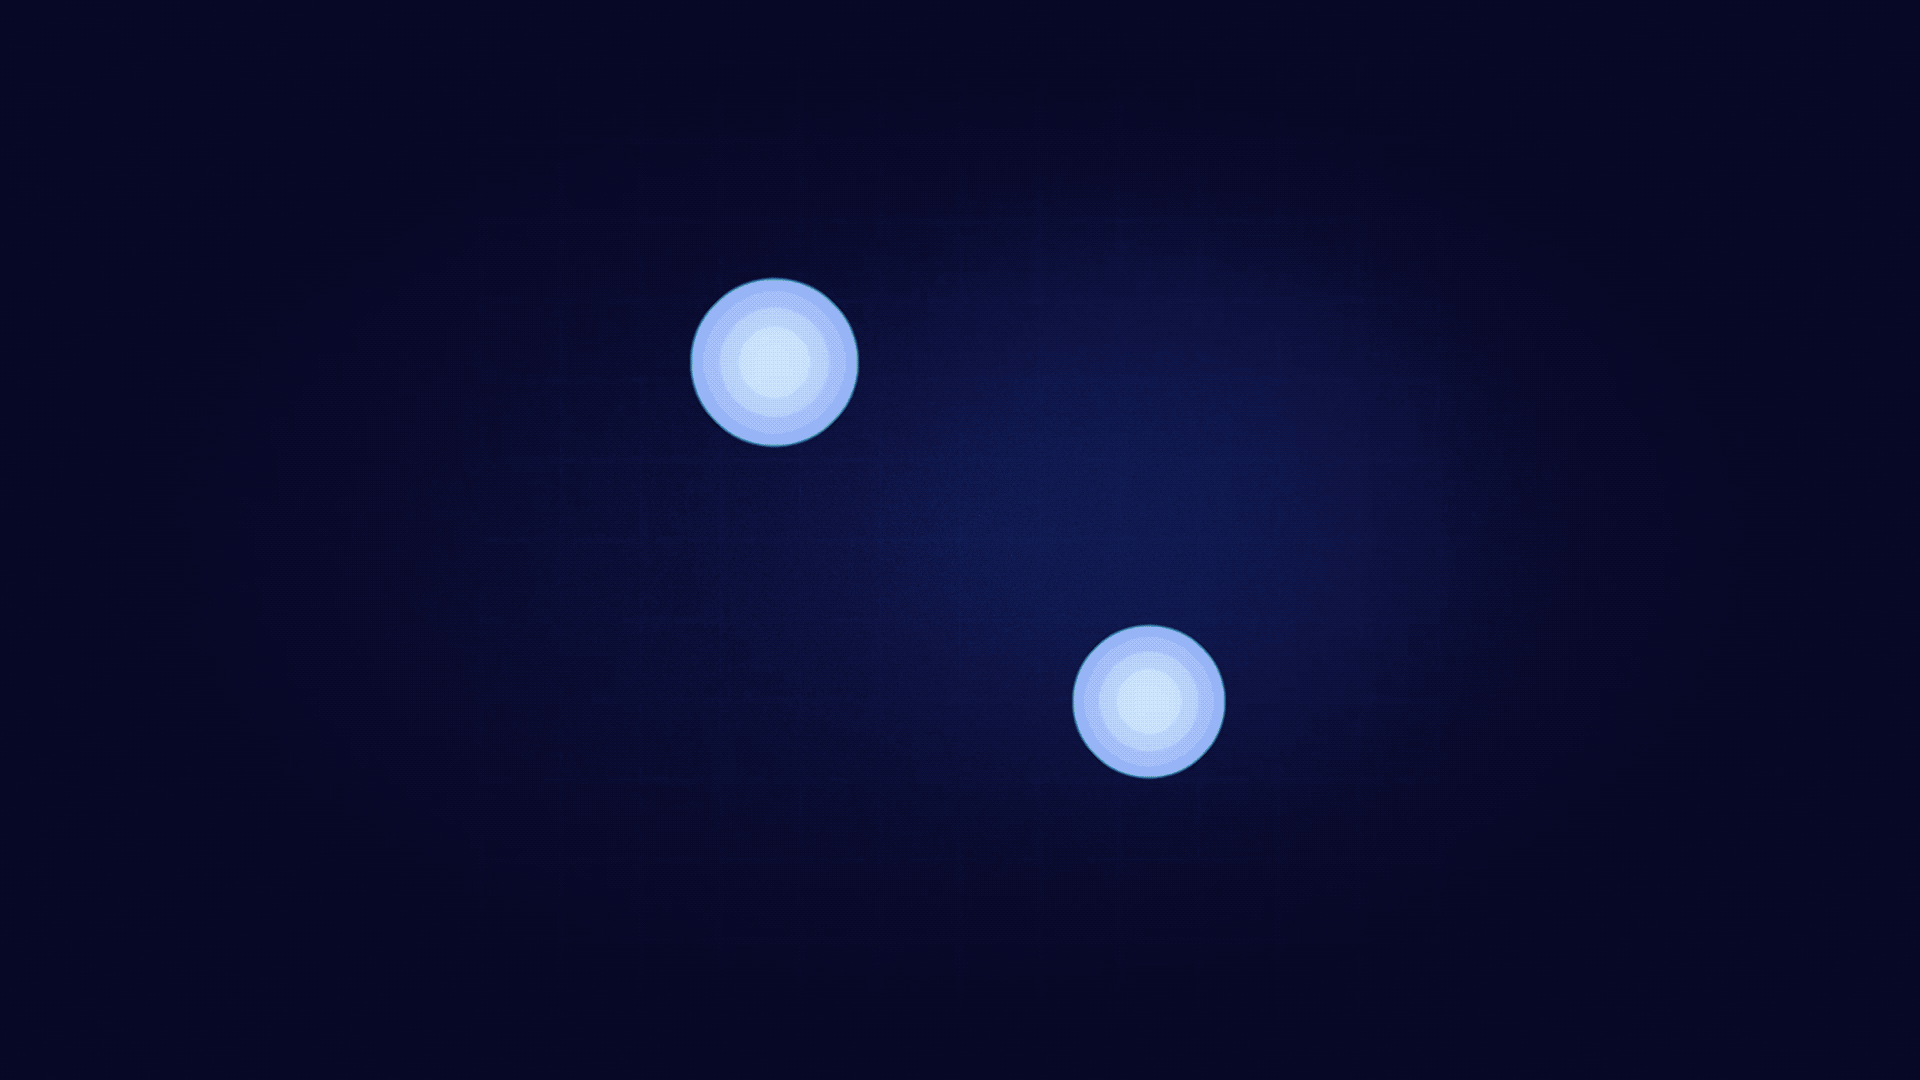 In this stylized GIF, two neutron stars orbit each other, getting closer and closer until they collide against a blue background. The stars are depicted as nested circles of bluish-white. As they get close, blue clouds of debris are pulled off of each one. After they collide, a black hole forms in the center, surrounded by a horizontal oval cloud of blue debris. An orange cloud of debris shoots up from above and below the black hole. Pink cones of light extend above and below the black hole, extending beyond the orange clouds.